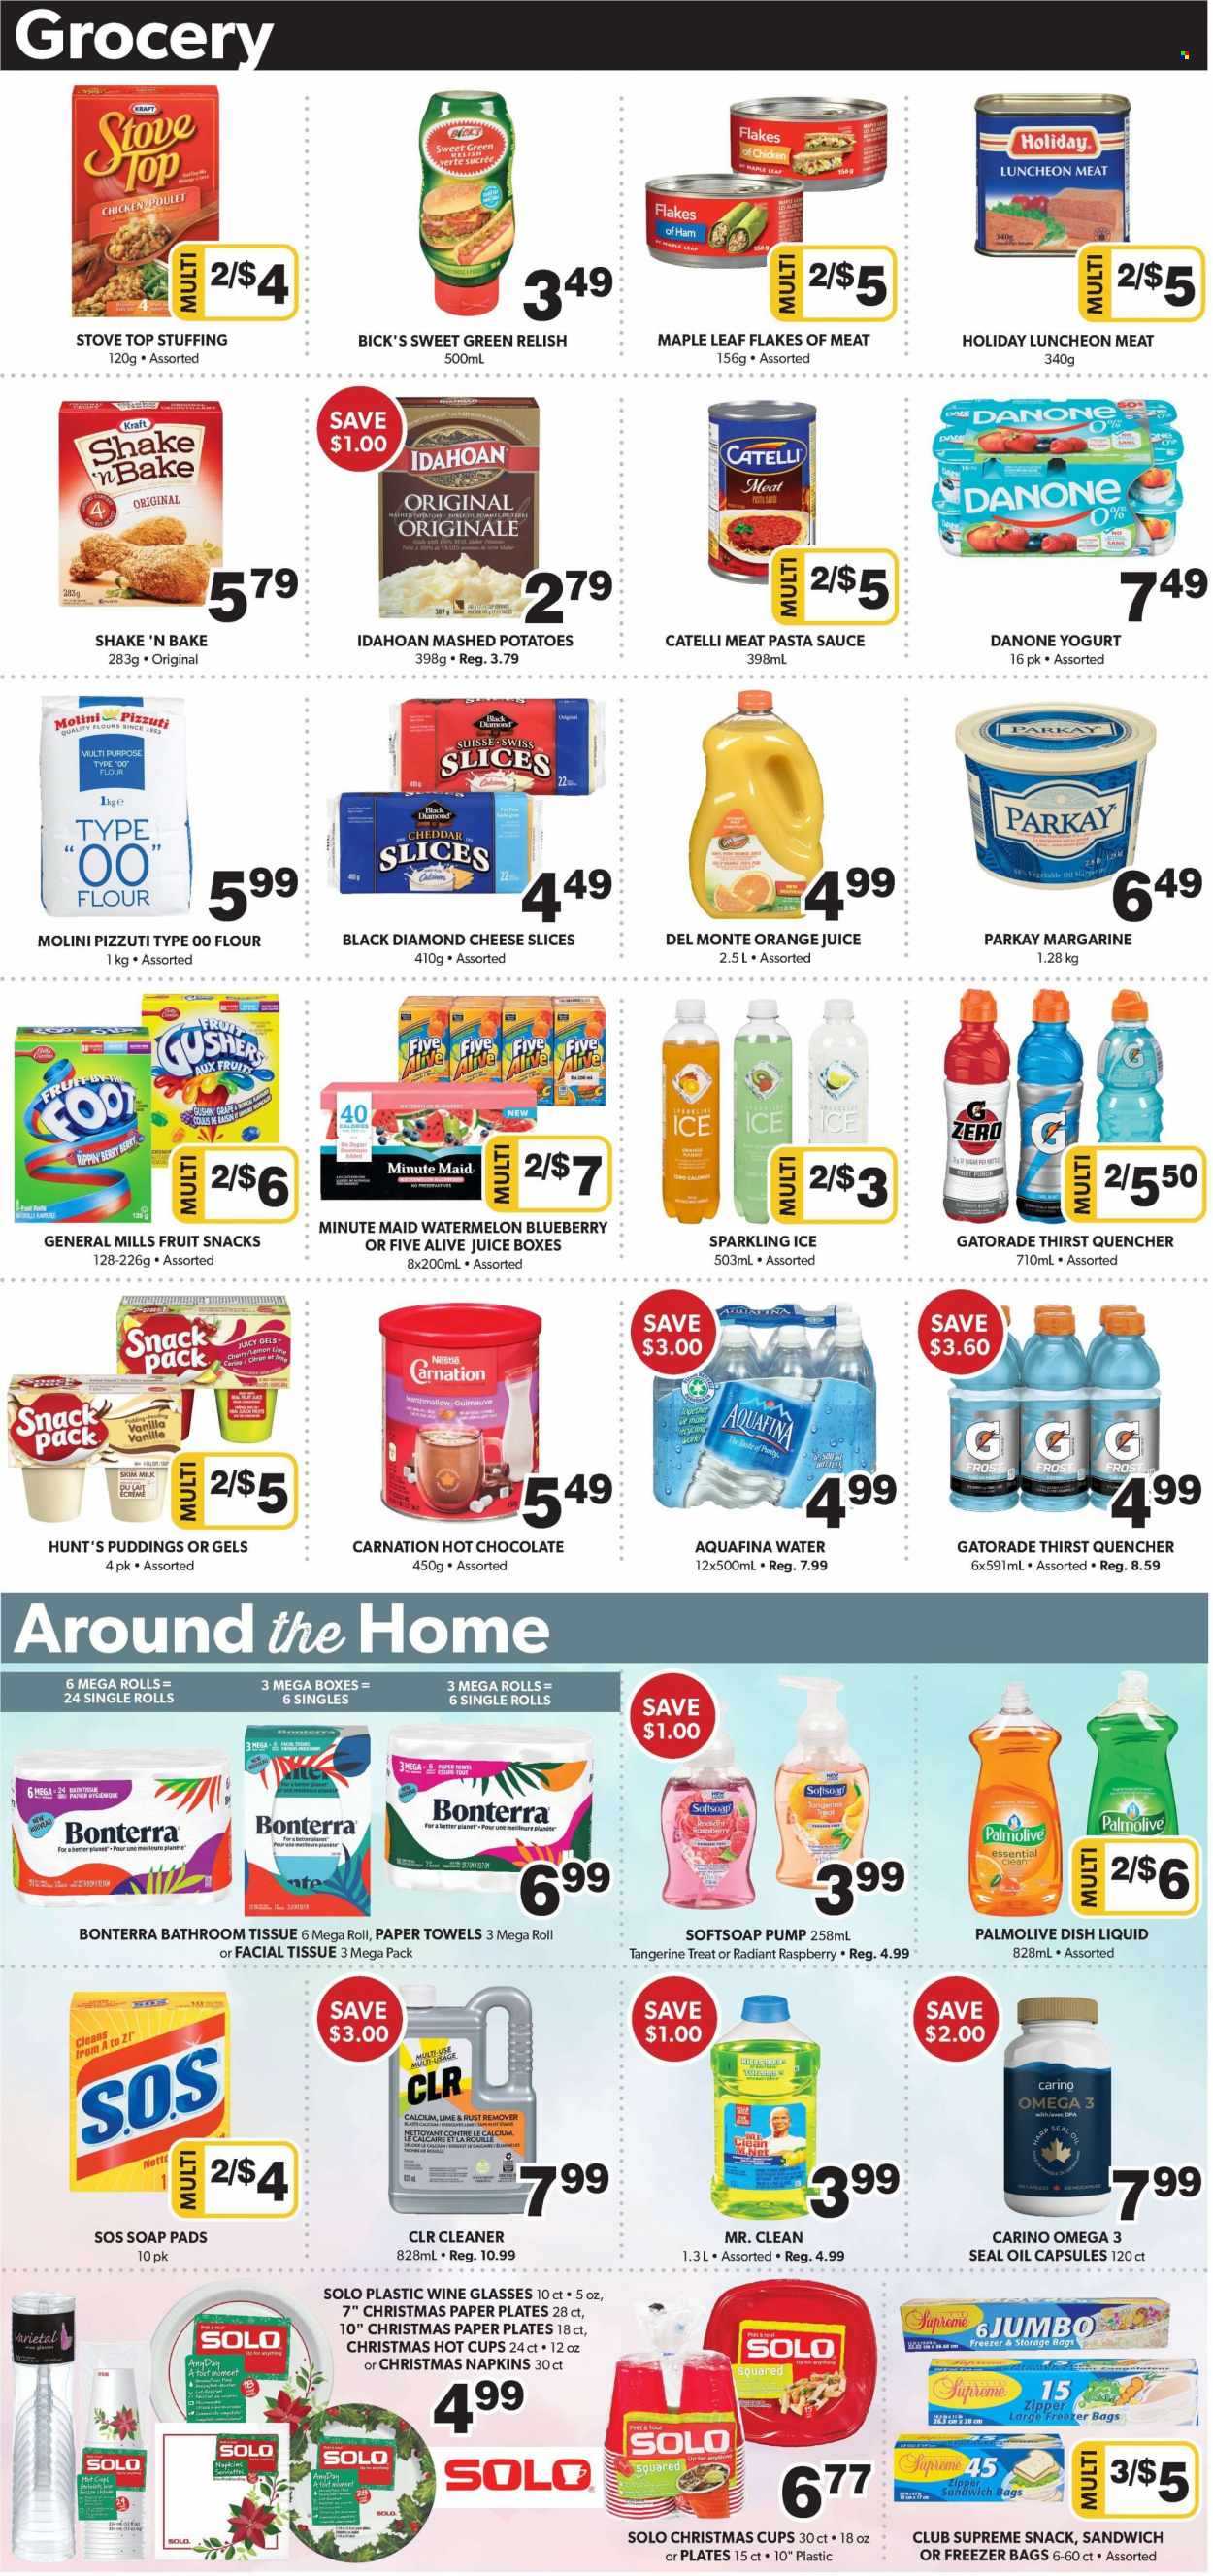 thumbnail - Colemans Flyer - November 24, 2022 - November 30, 2022 - Sales products - mango, watermelon, cherries, mashed potatoes, pasta sauce, sauce, Kraft®, ham, lunch meat, sliced cheese, cheddar, cheese, pudding, yoghurt, milk, shake, margarine, marshmallows, fruit snack, flour, stuffing mix, sweetener, Del Monte, vegetable oil, oil, orange juice, Gatorade, fruit punch, Aquafina, hot chocolate, Purity, napkins, bath tissue, kitchen towels, paper towels, cleaner, dishwashing liquid, Softsoap, Palmolive, soap, facial tissues, Omega-3, calcium, Nestlé, Danone. Page 4.